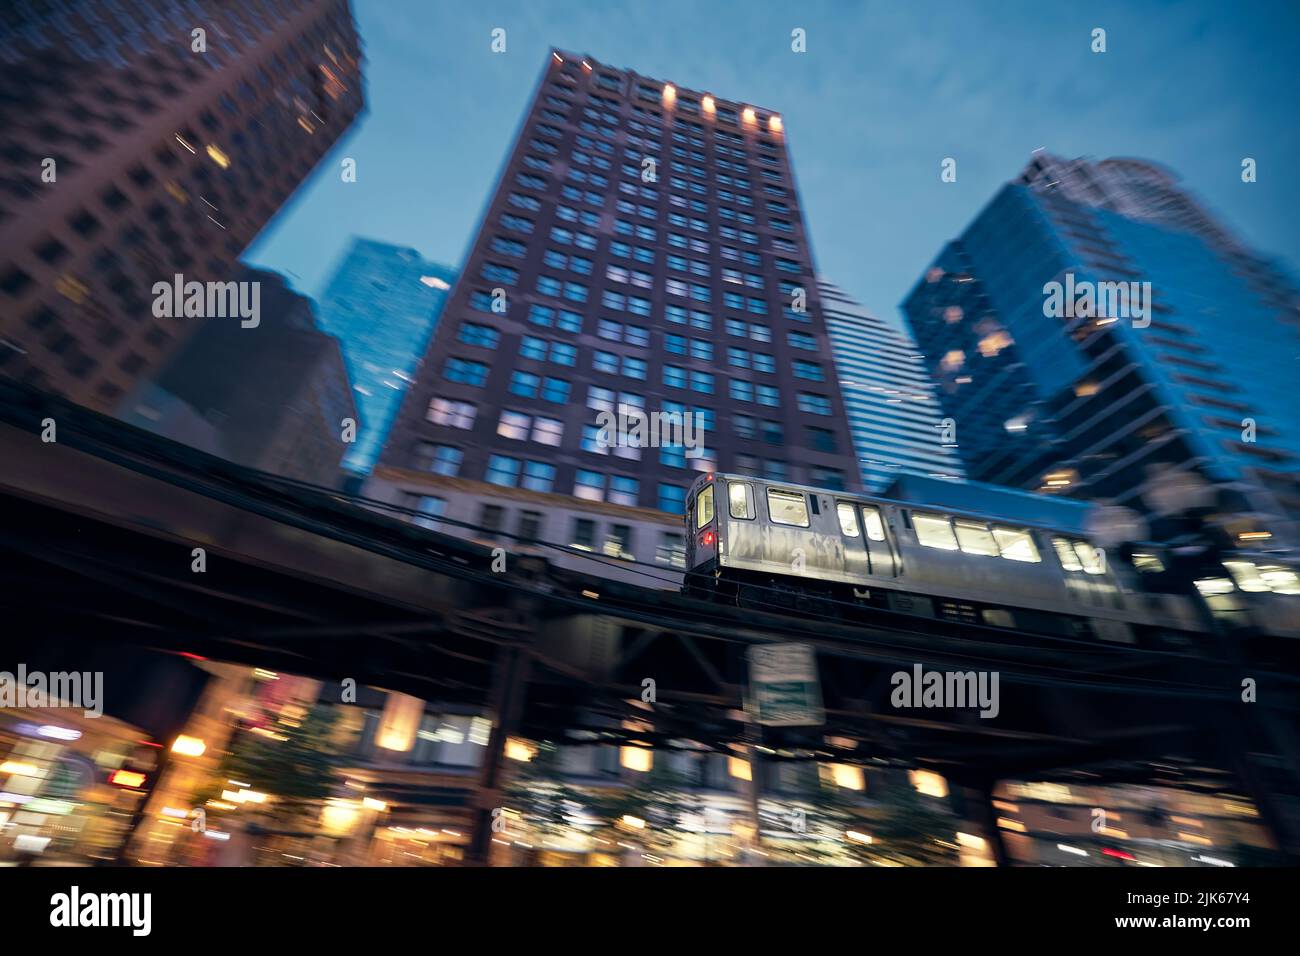 Elevated train in Chicago in blurred motion against skyscrapers in downtown disctrict at night. Stock Photo